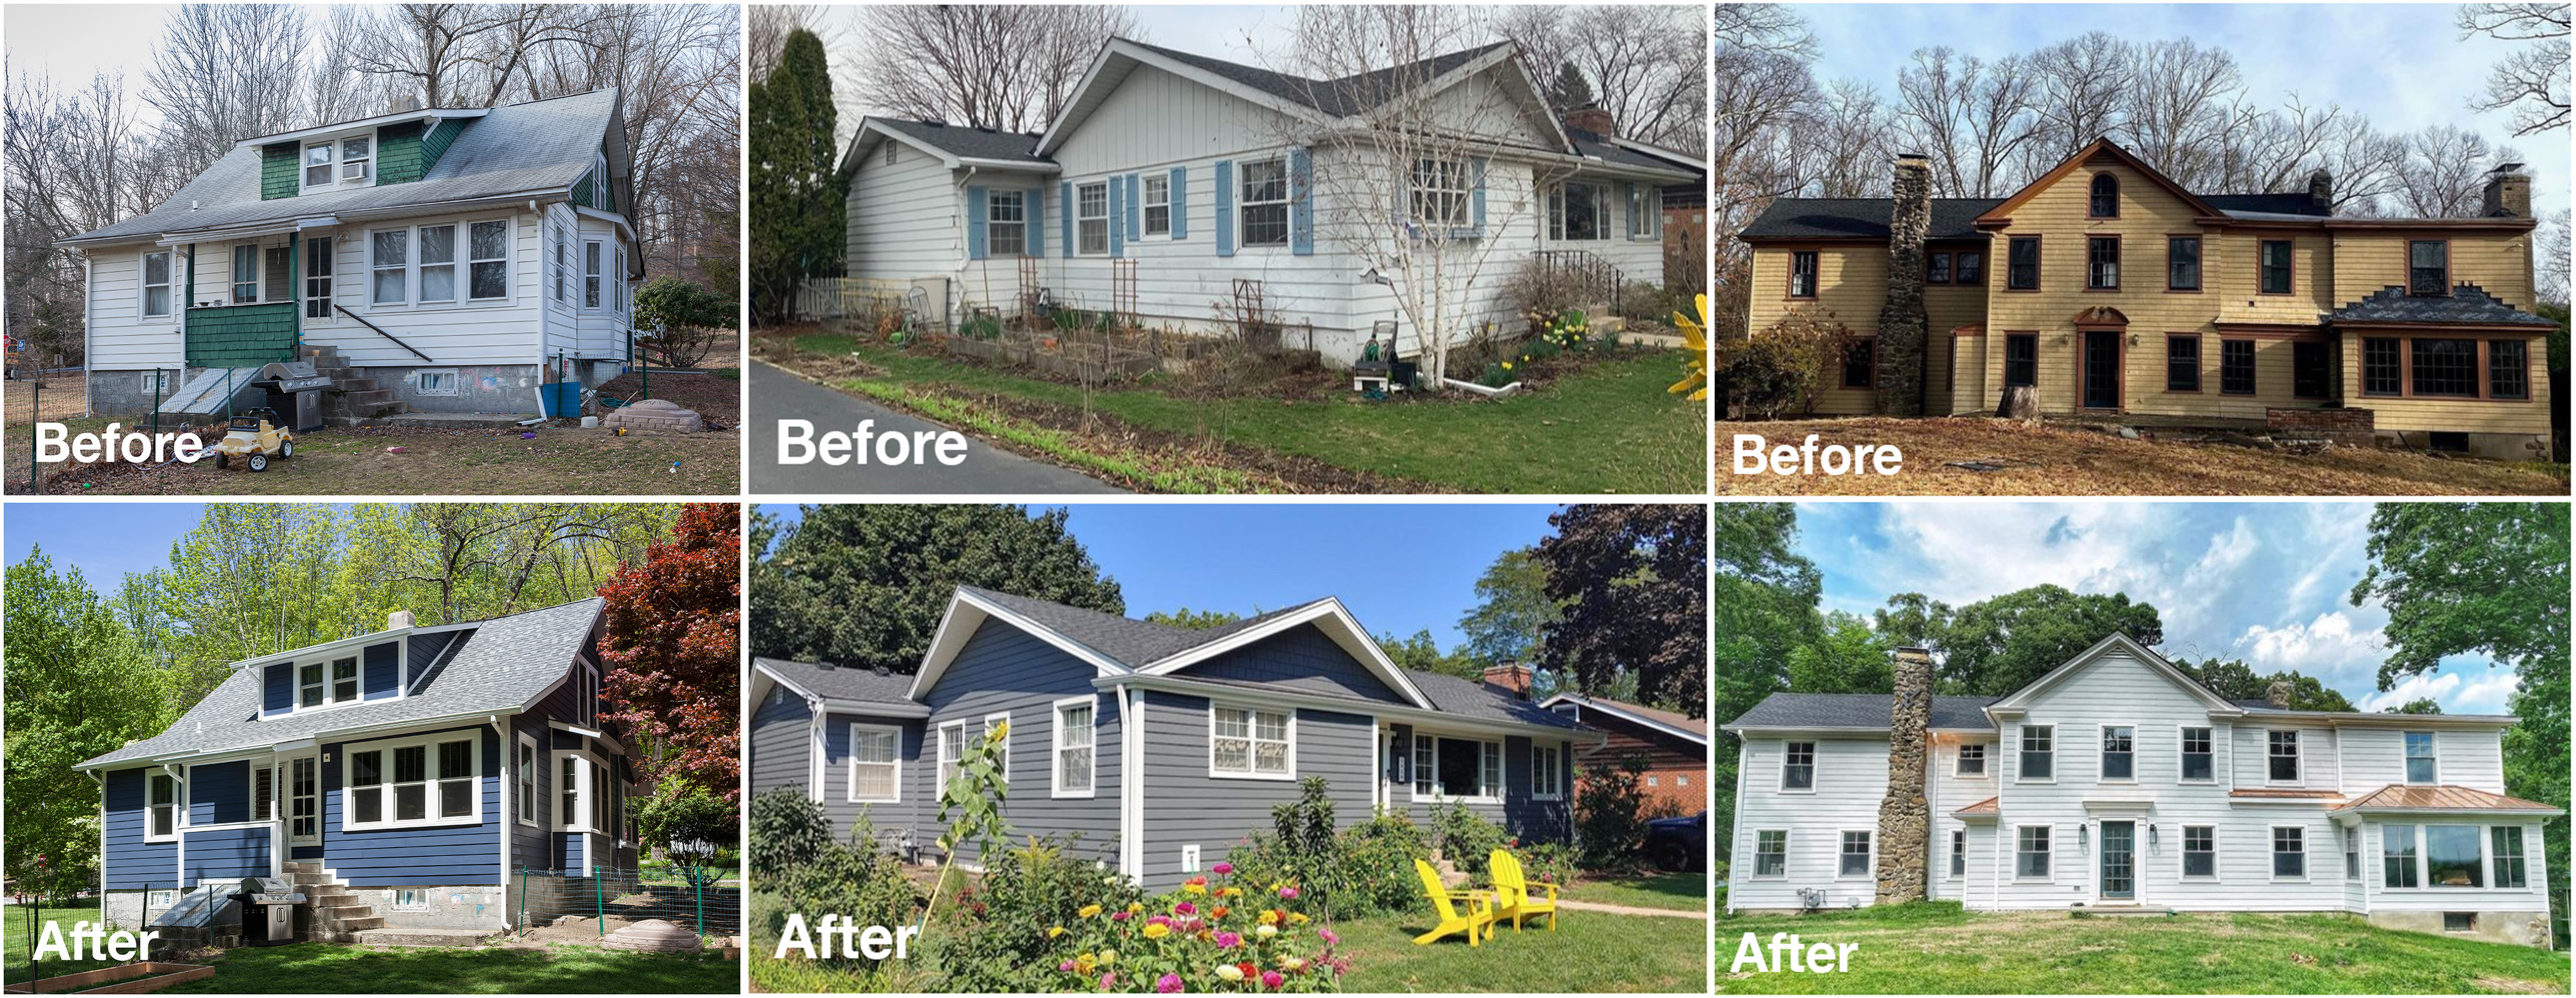 Three Before and After Siding Transformation Houses